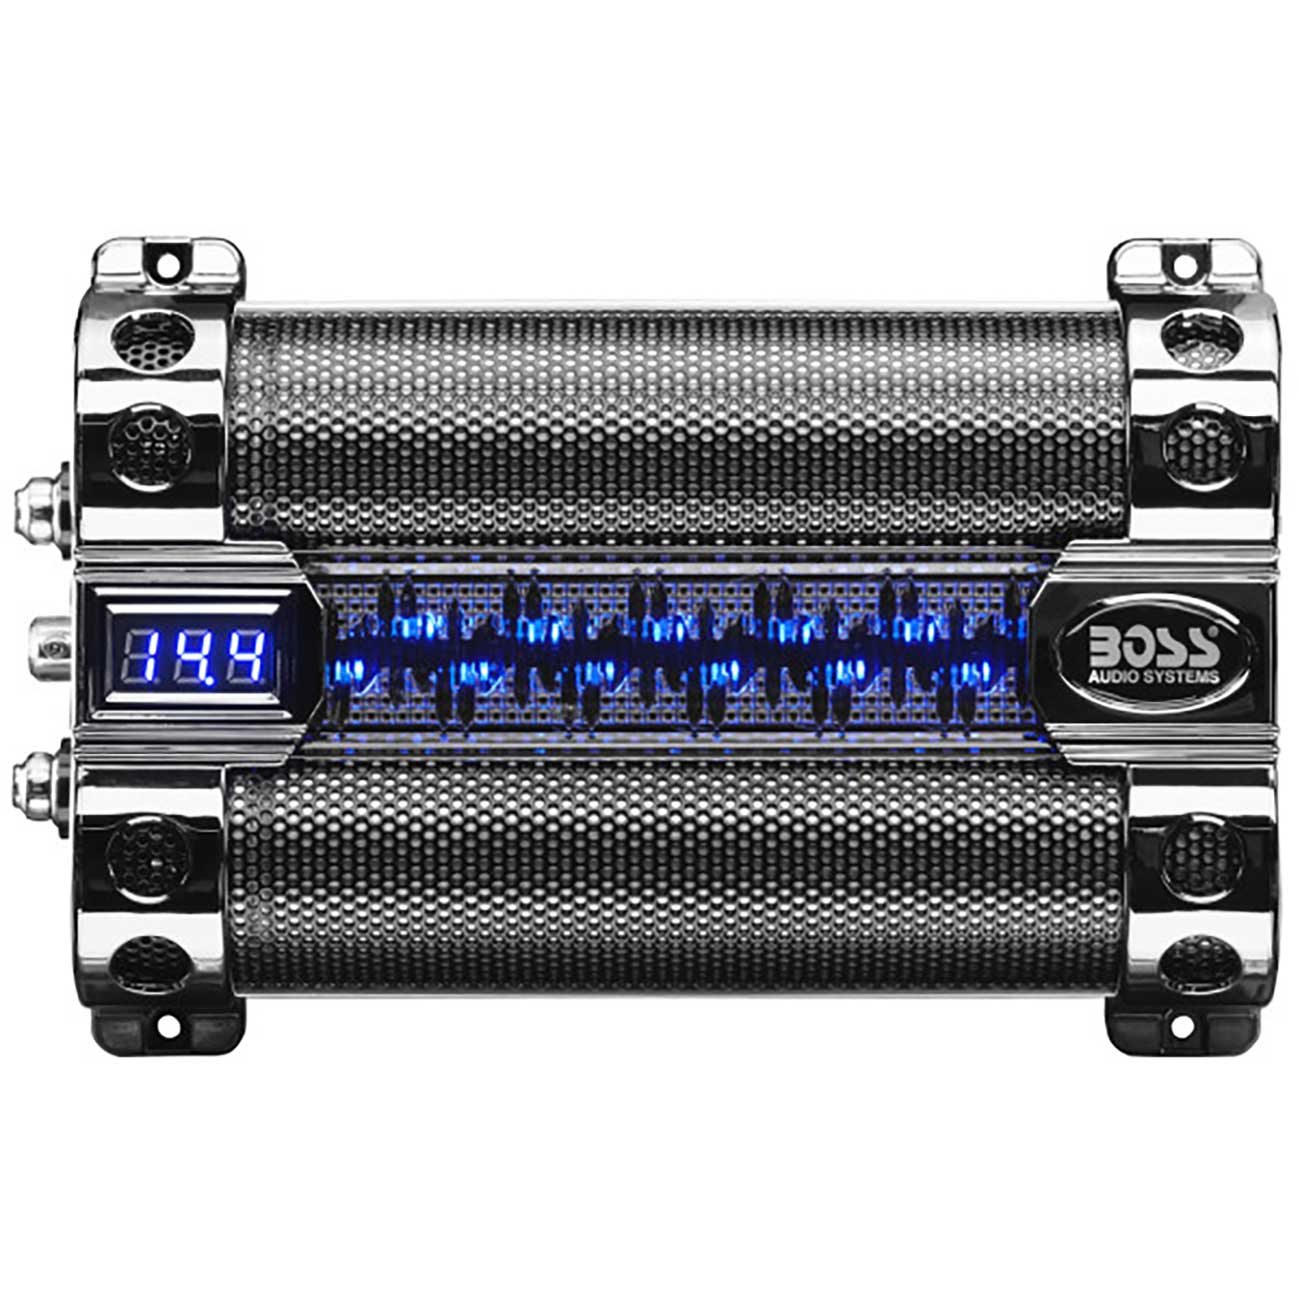 BOSS Audio Systems CAP8 Car Capacitor - 8 Farad, Energy Storage, Enhanced Bass From Stereo, Warning Reverse Polarity Tone, Voltage Overload Low Battery Voltage Led